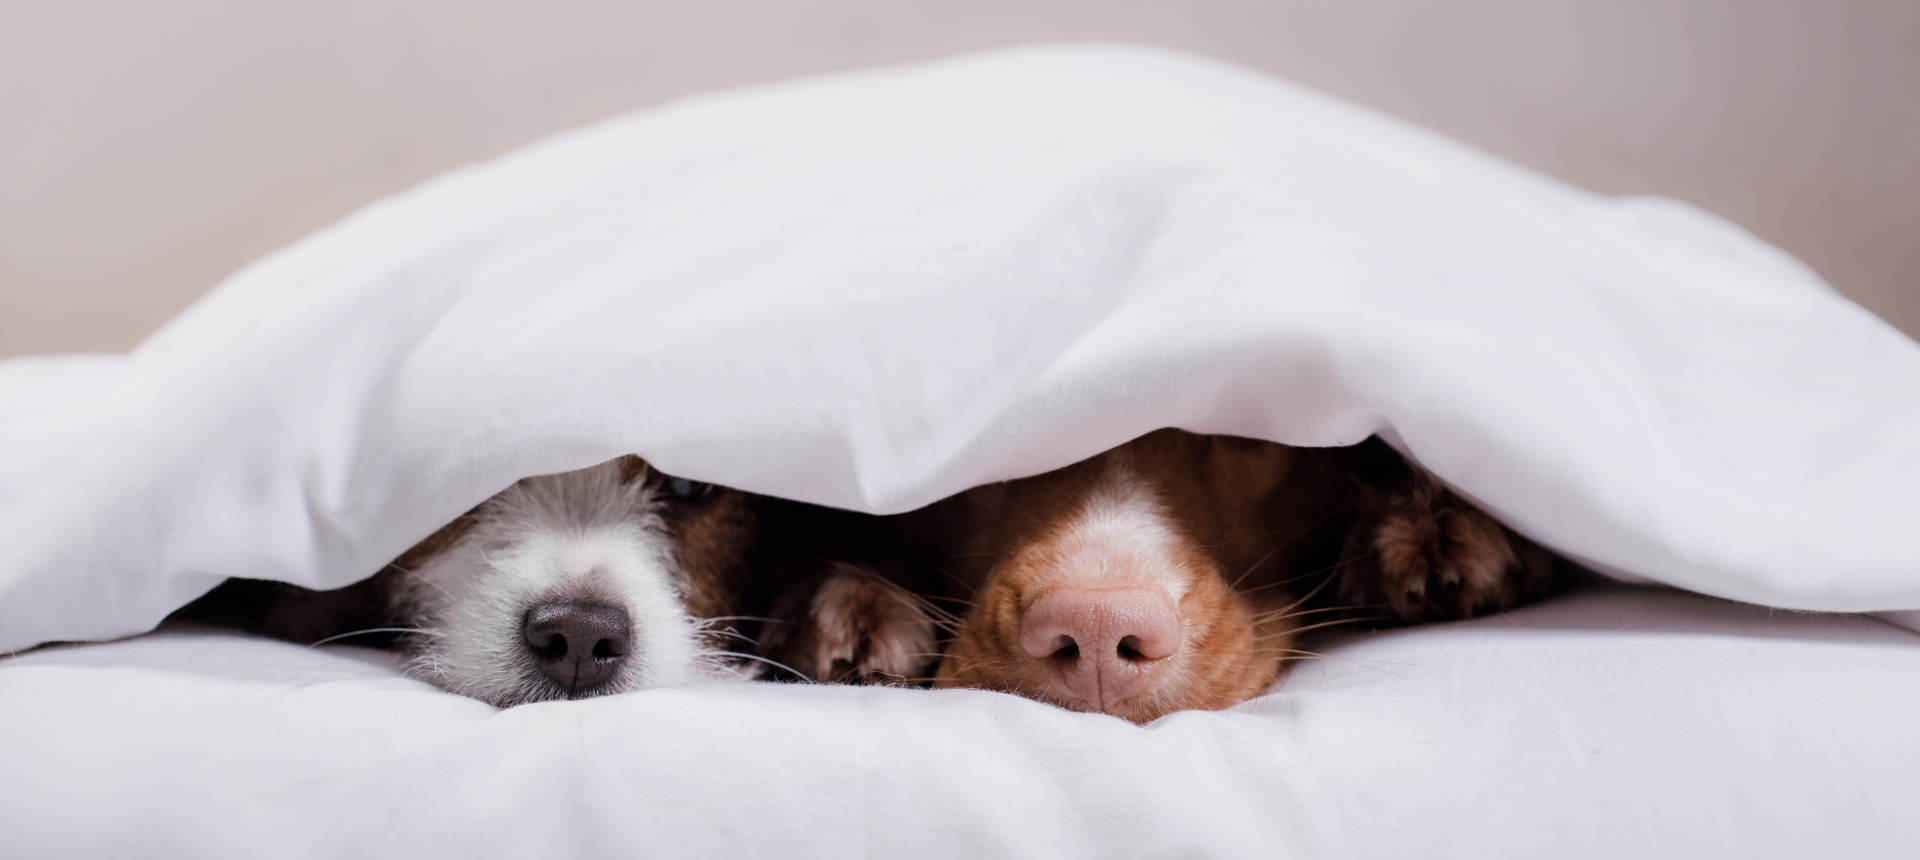 Two dogs under a white blanket